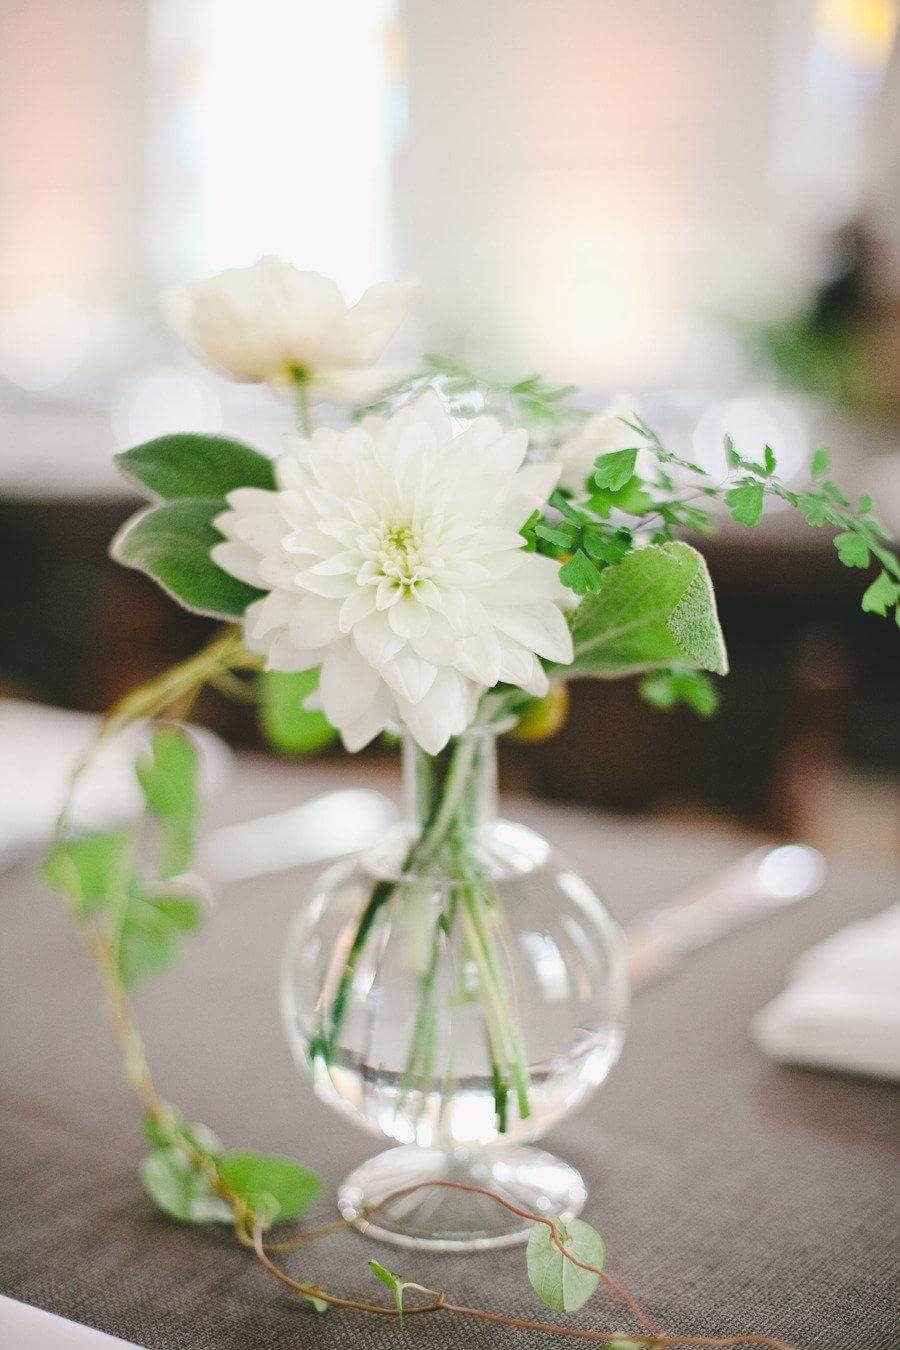 In Decorating With Vintage Bud Vases, this is a white flower surrounded by greenery